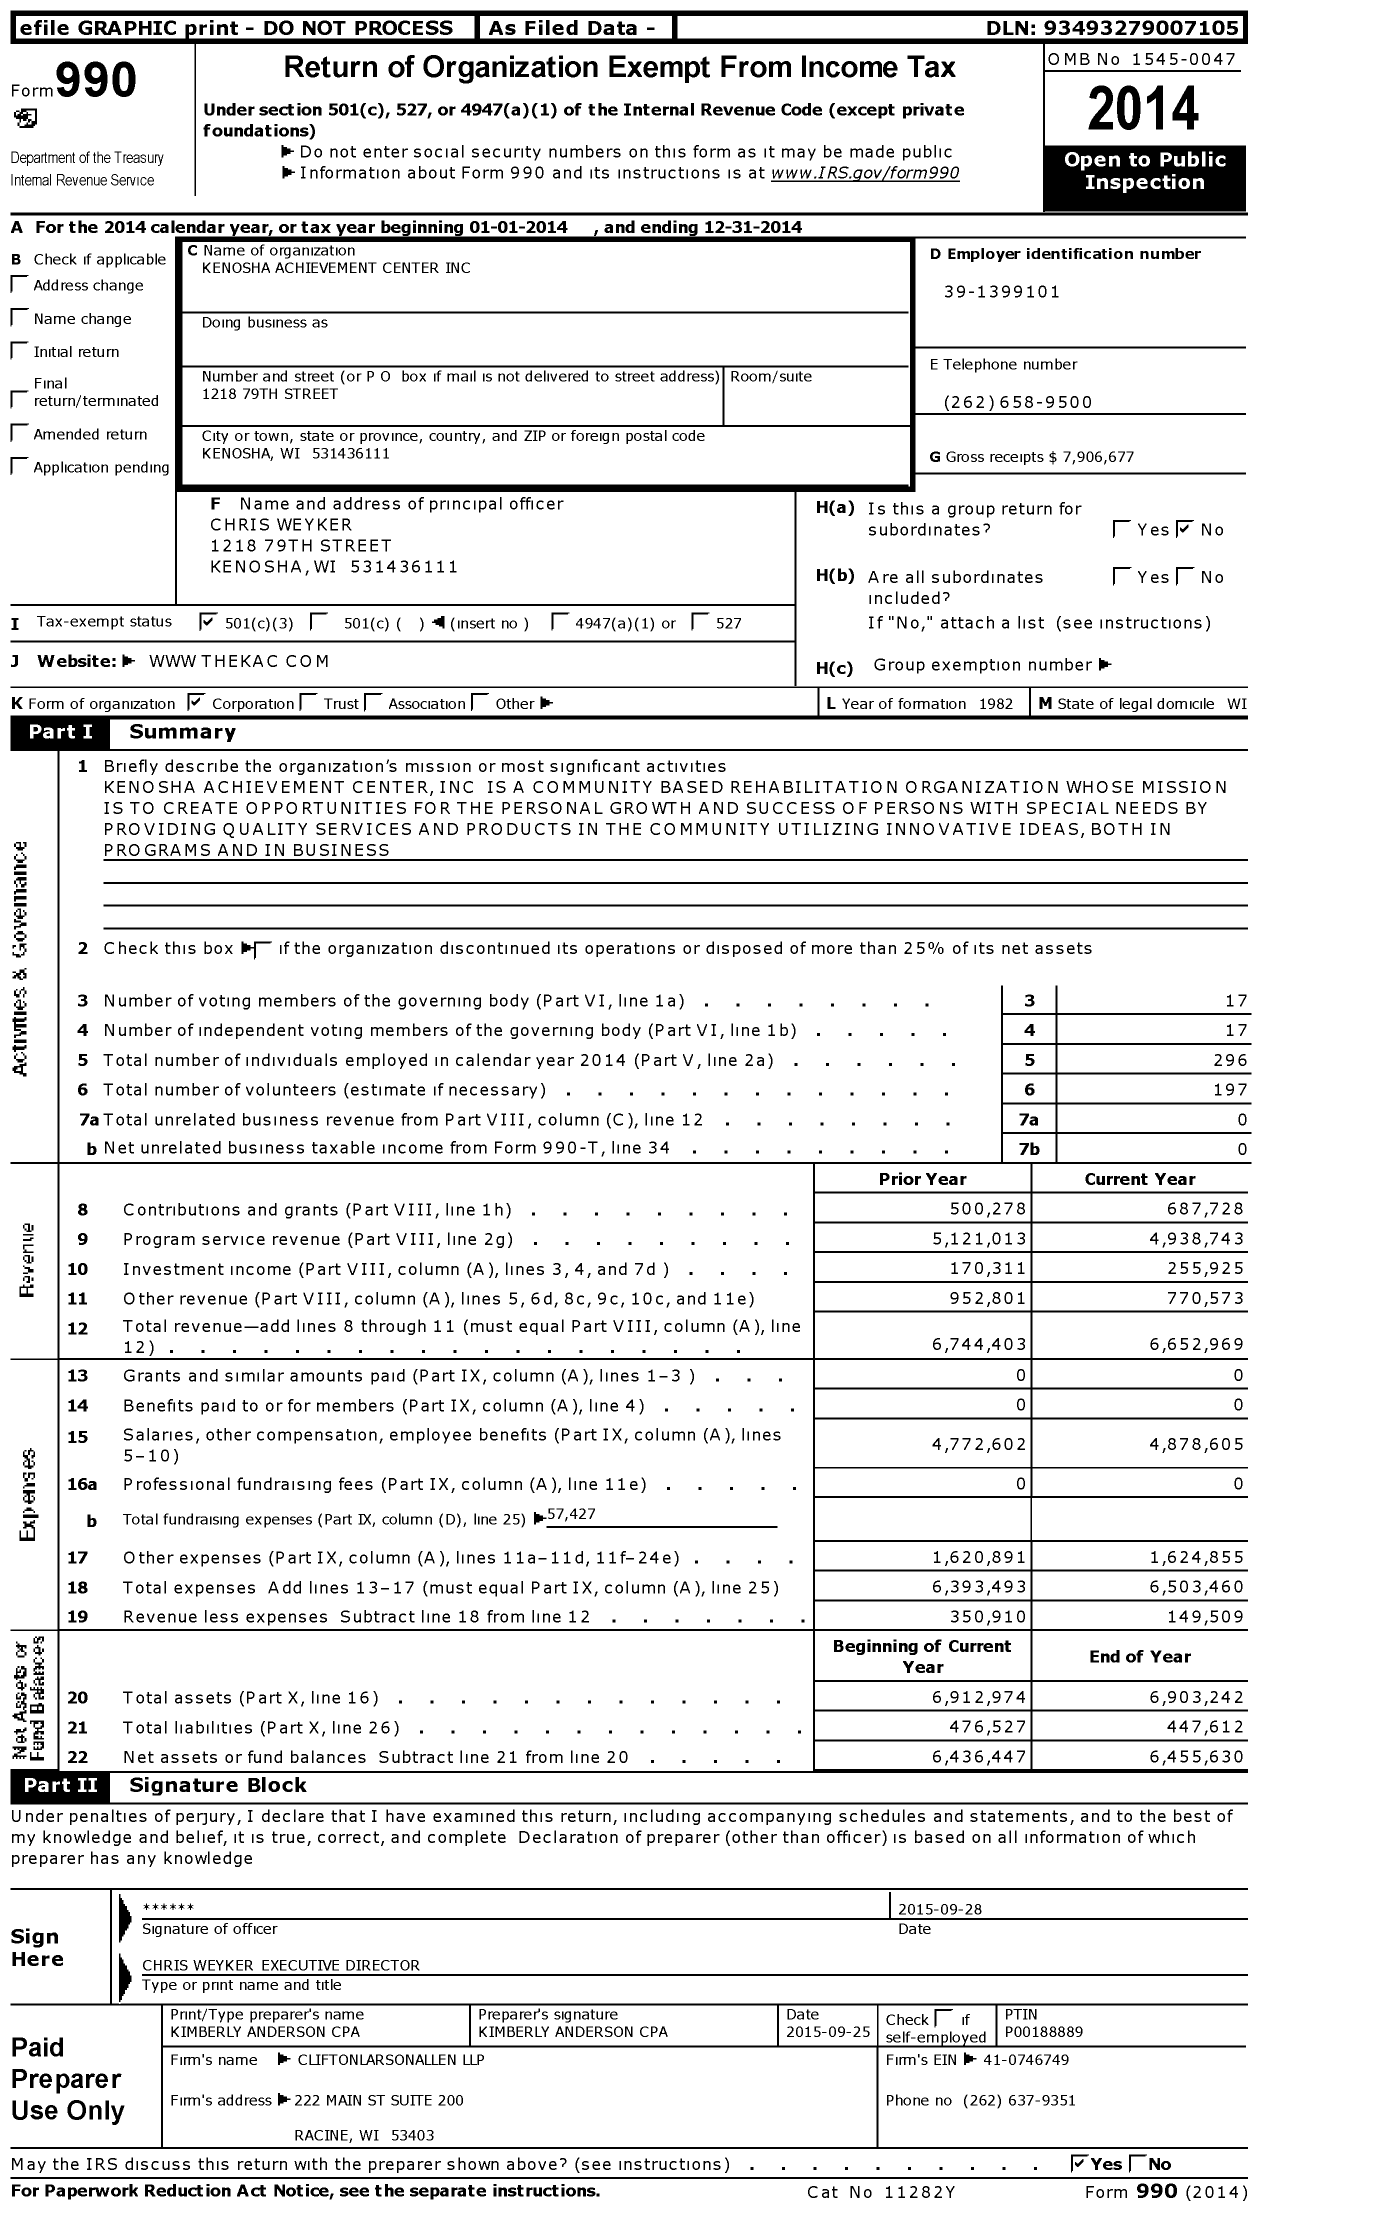 Image of first page of 2014 Form 990 for Kenosha Achievement Center (KAC)